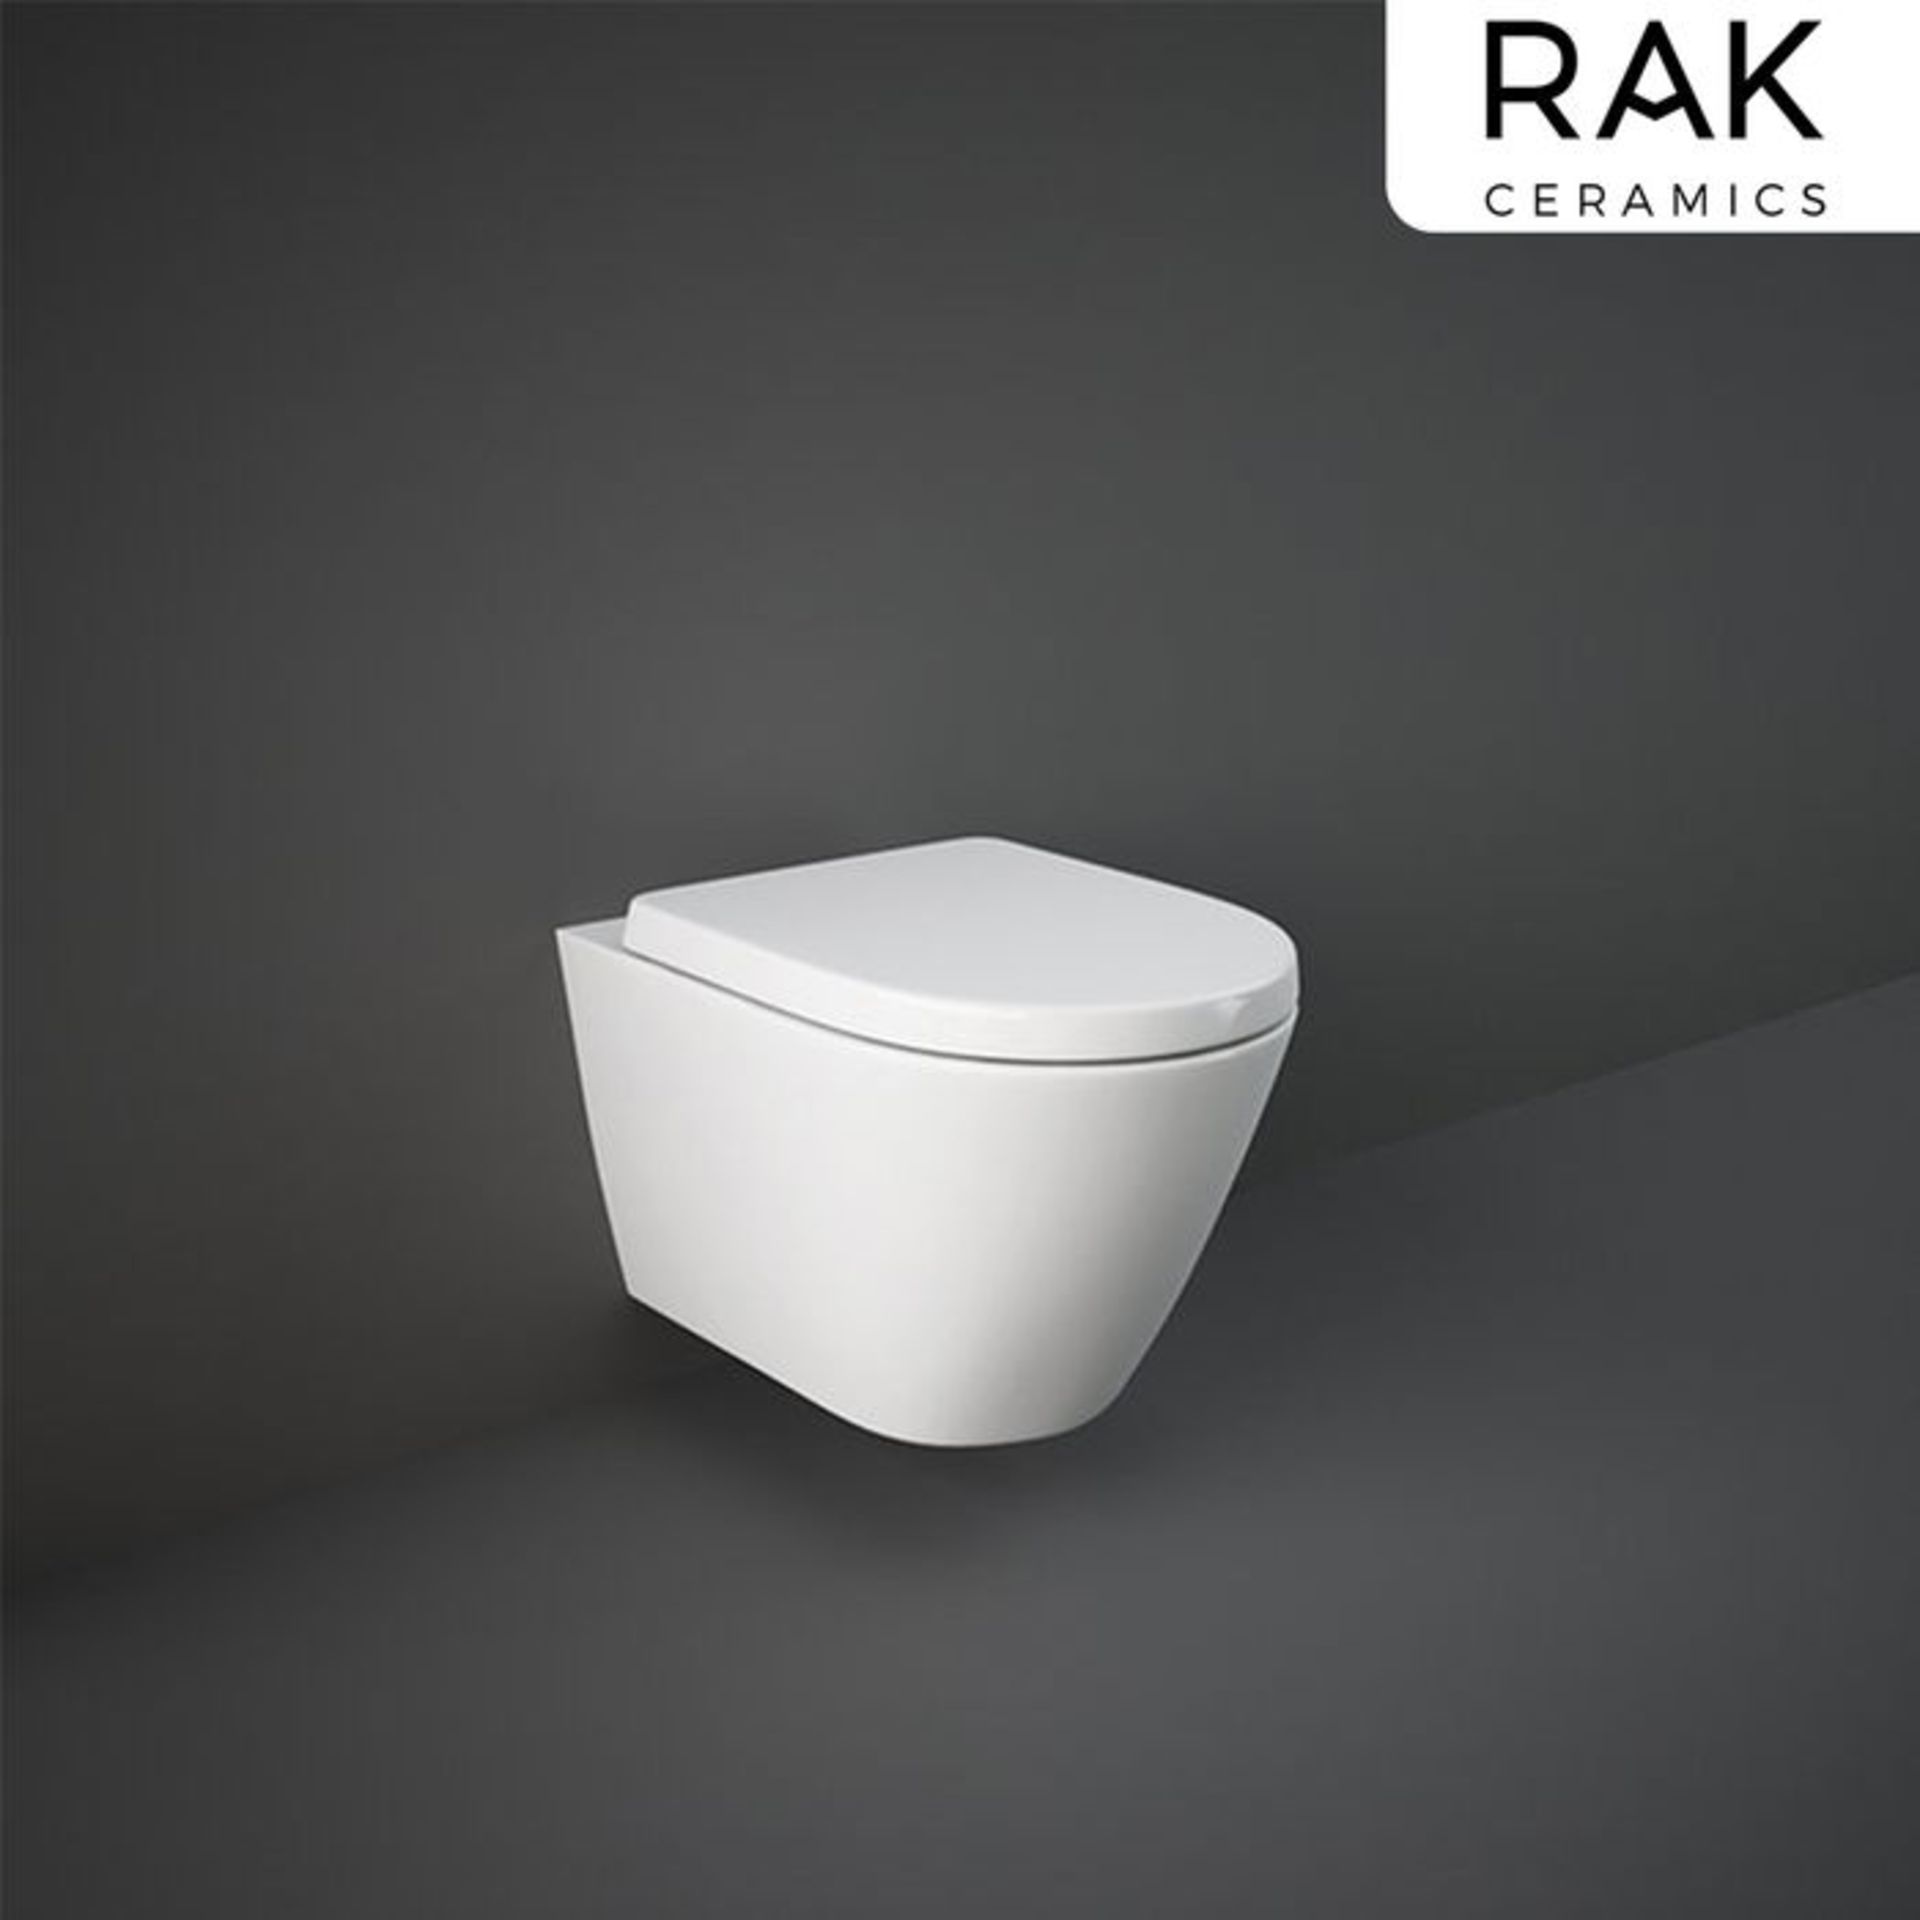 (NY146) RAK Resort Rimless Wall Hung Toilet. Rimless design makes it easy to clean Anti-scratch soft